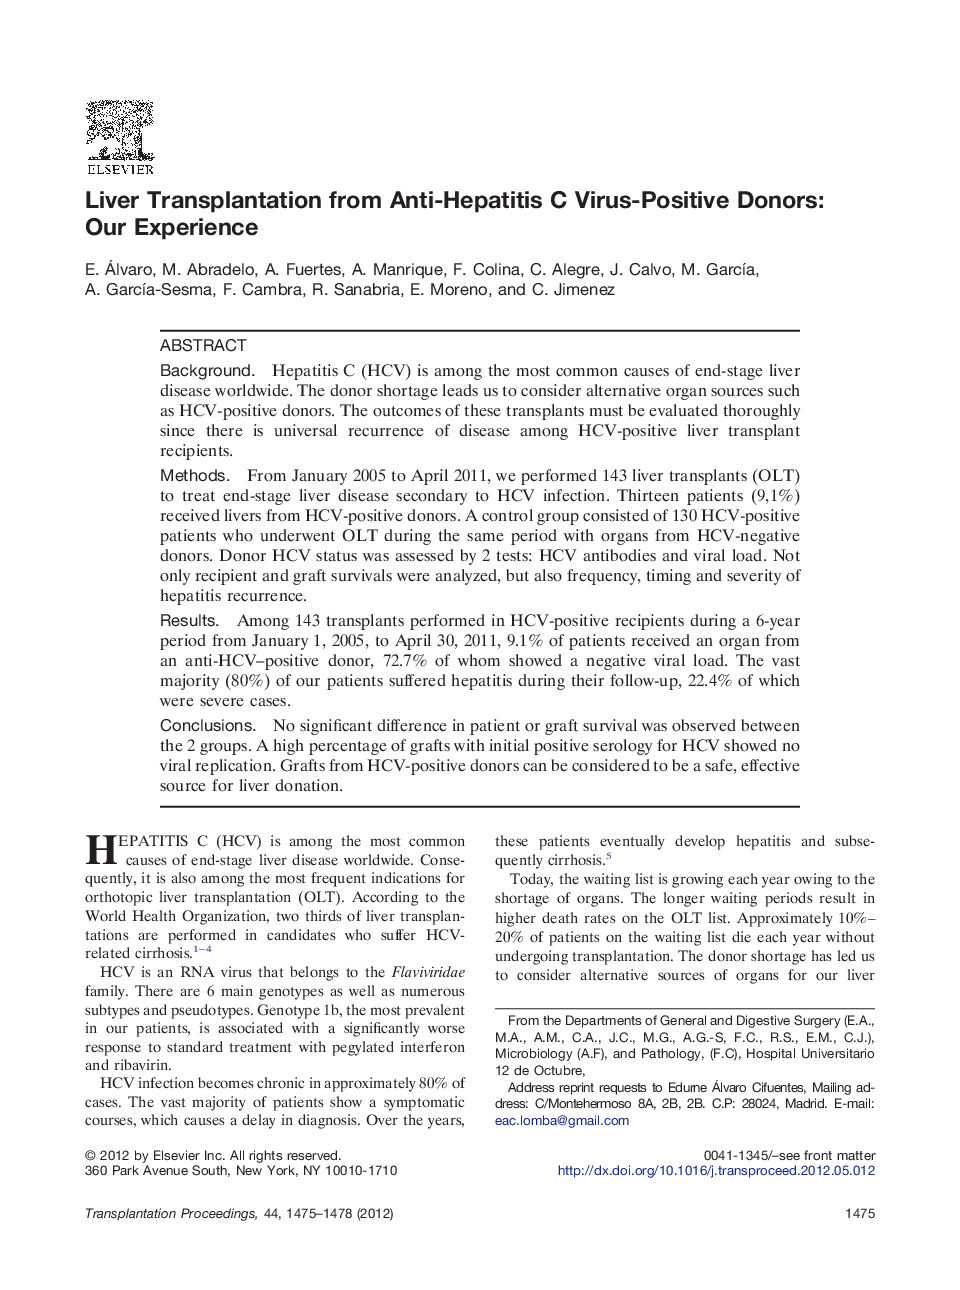 Liver Transplantation from Anti-Hepatitis C Virus-Positive Donors: Our Experience